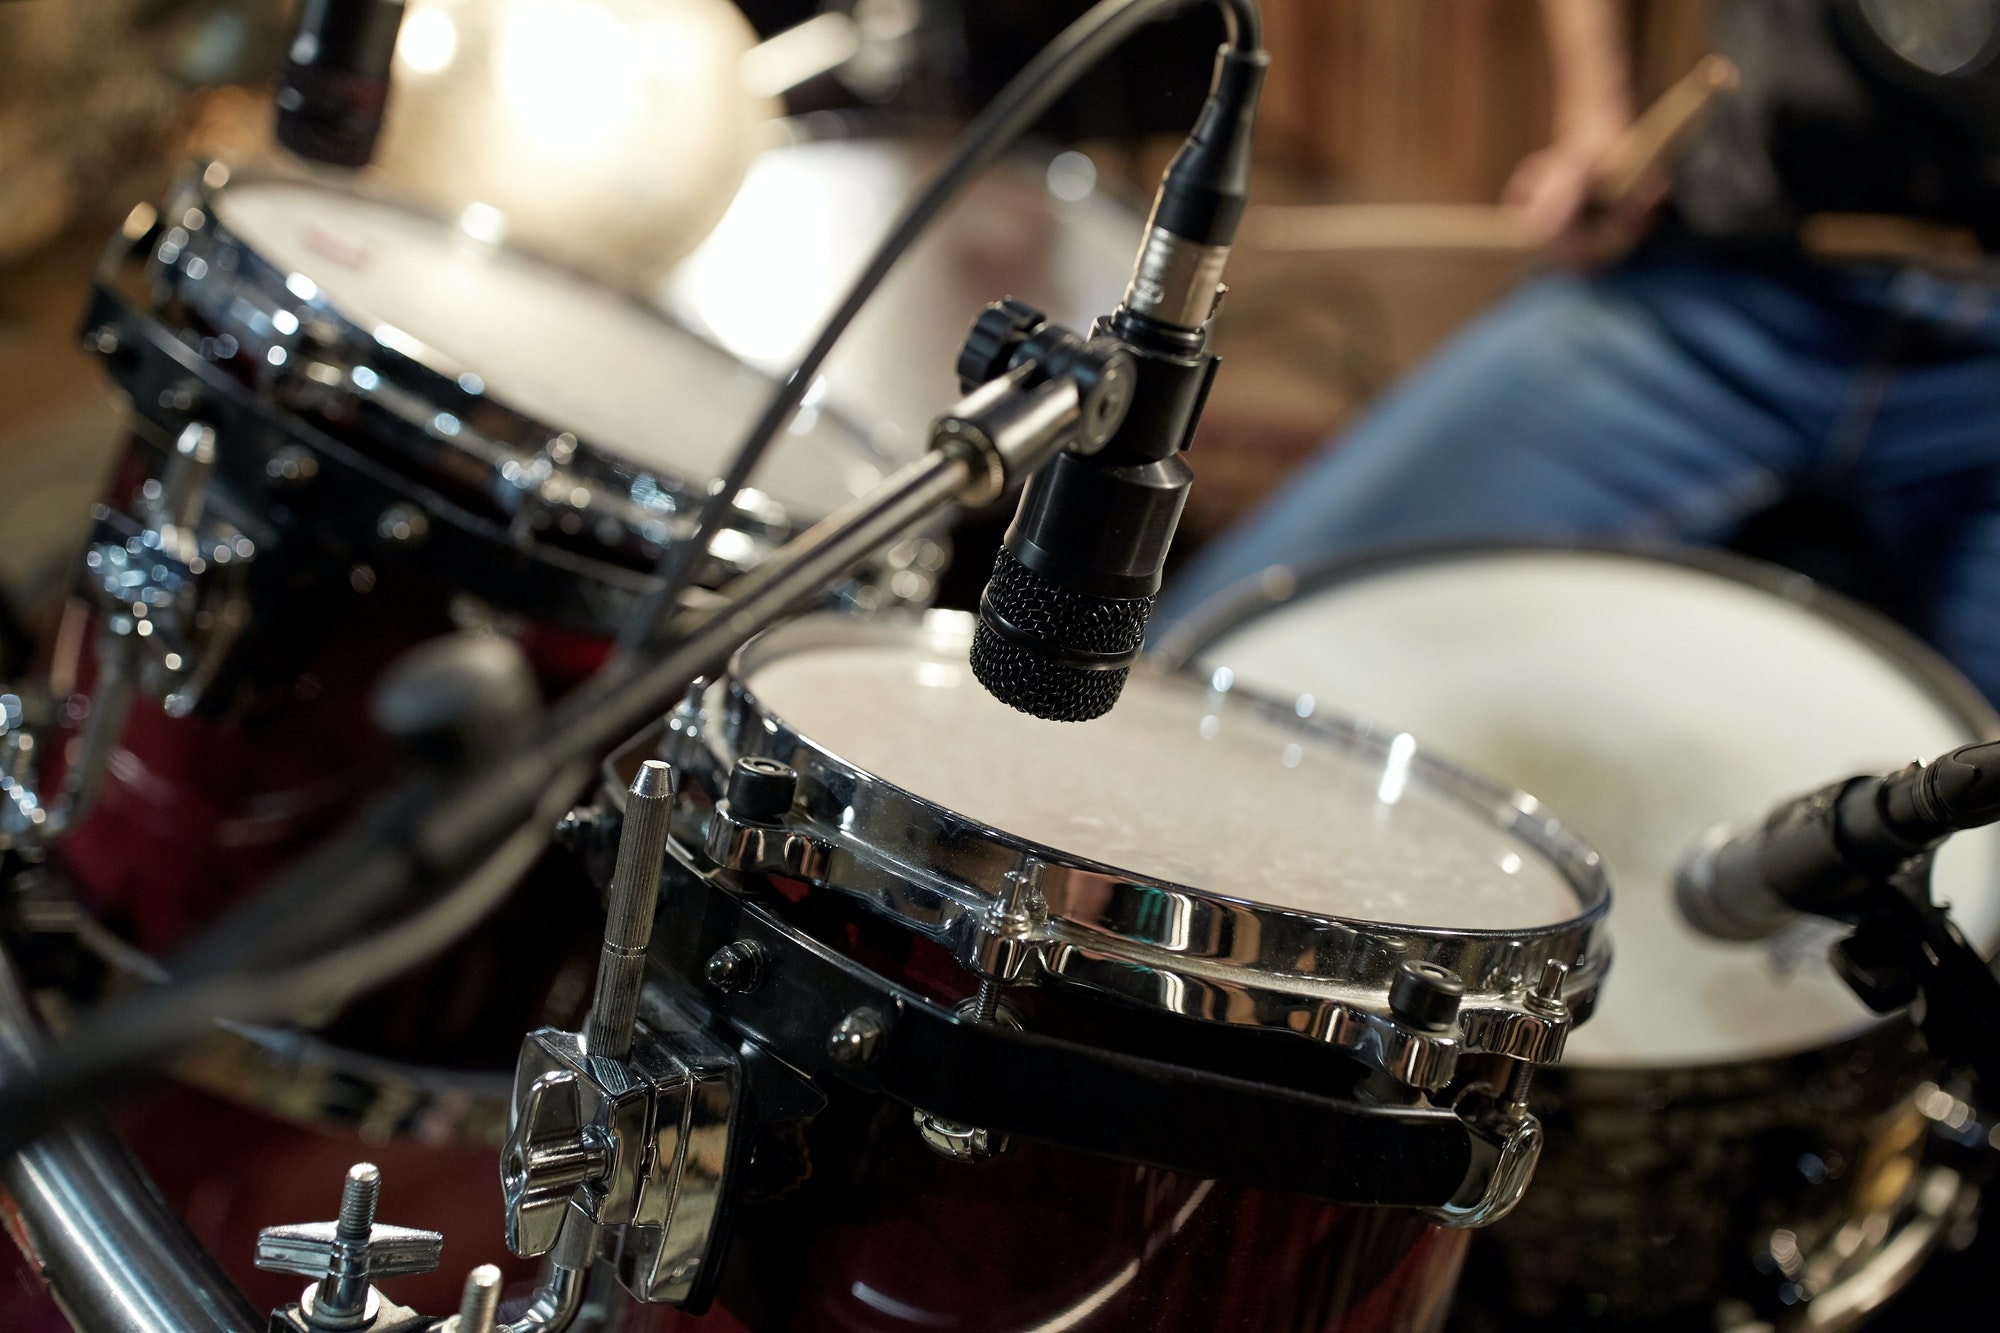 drums and microphone at music studio